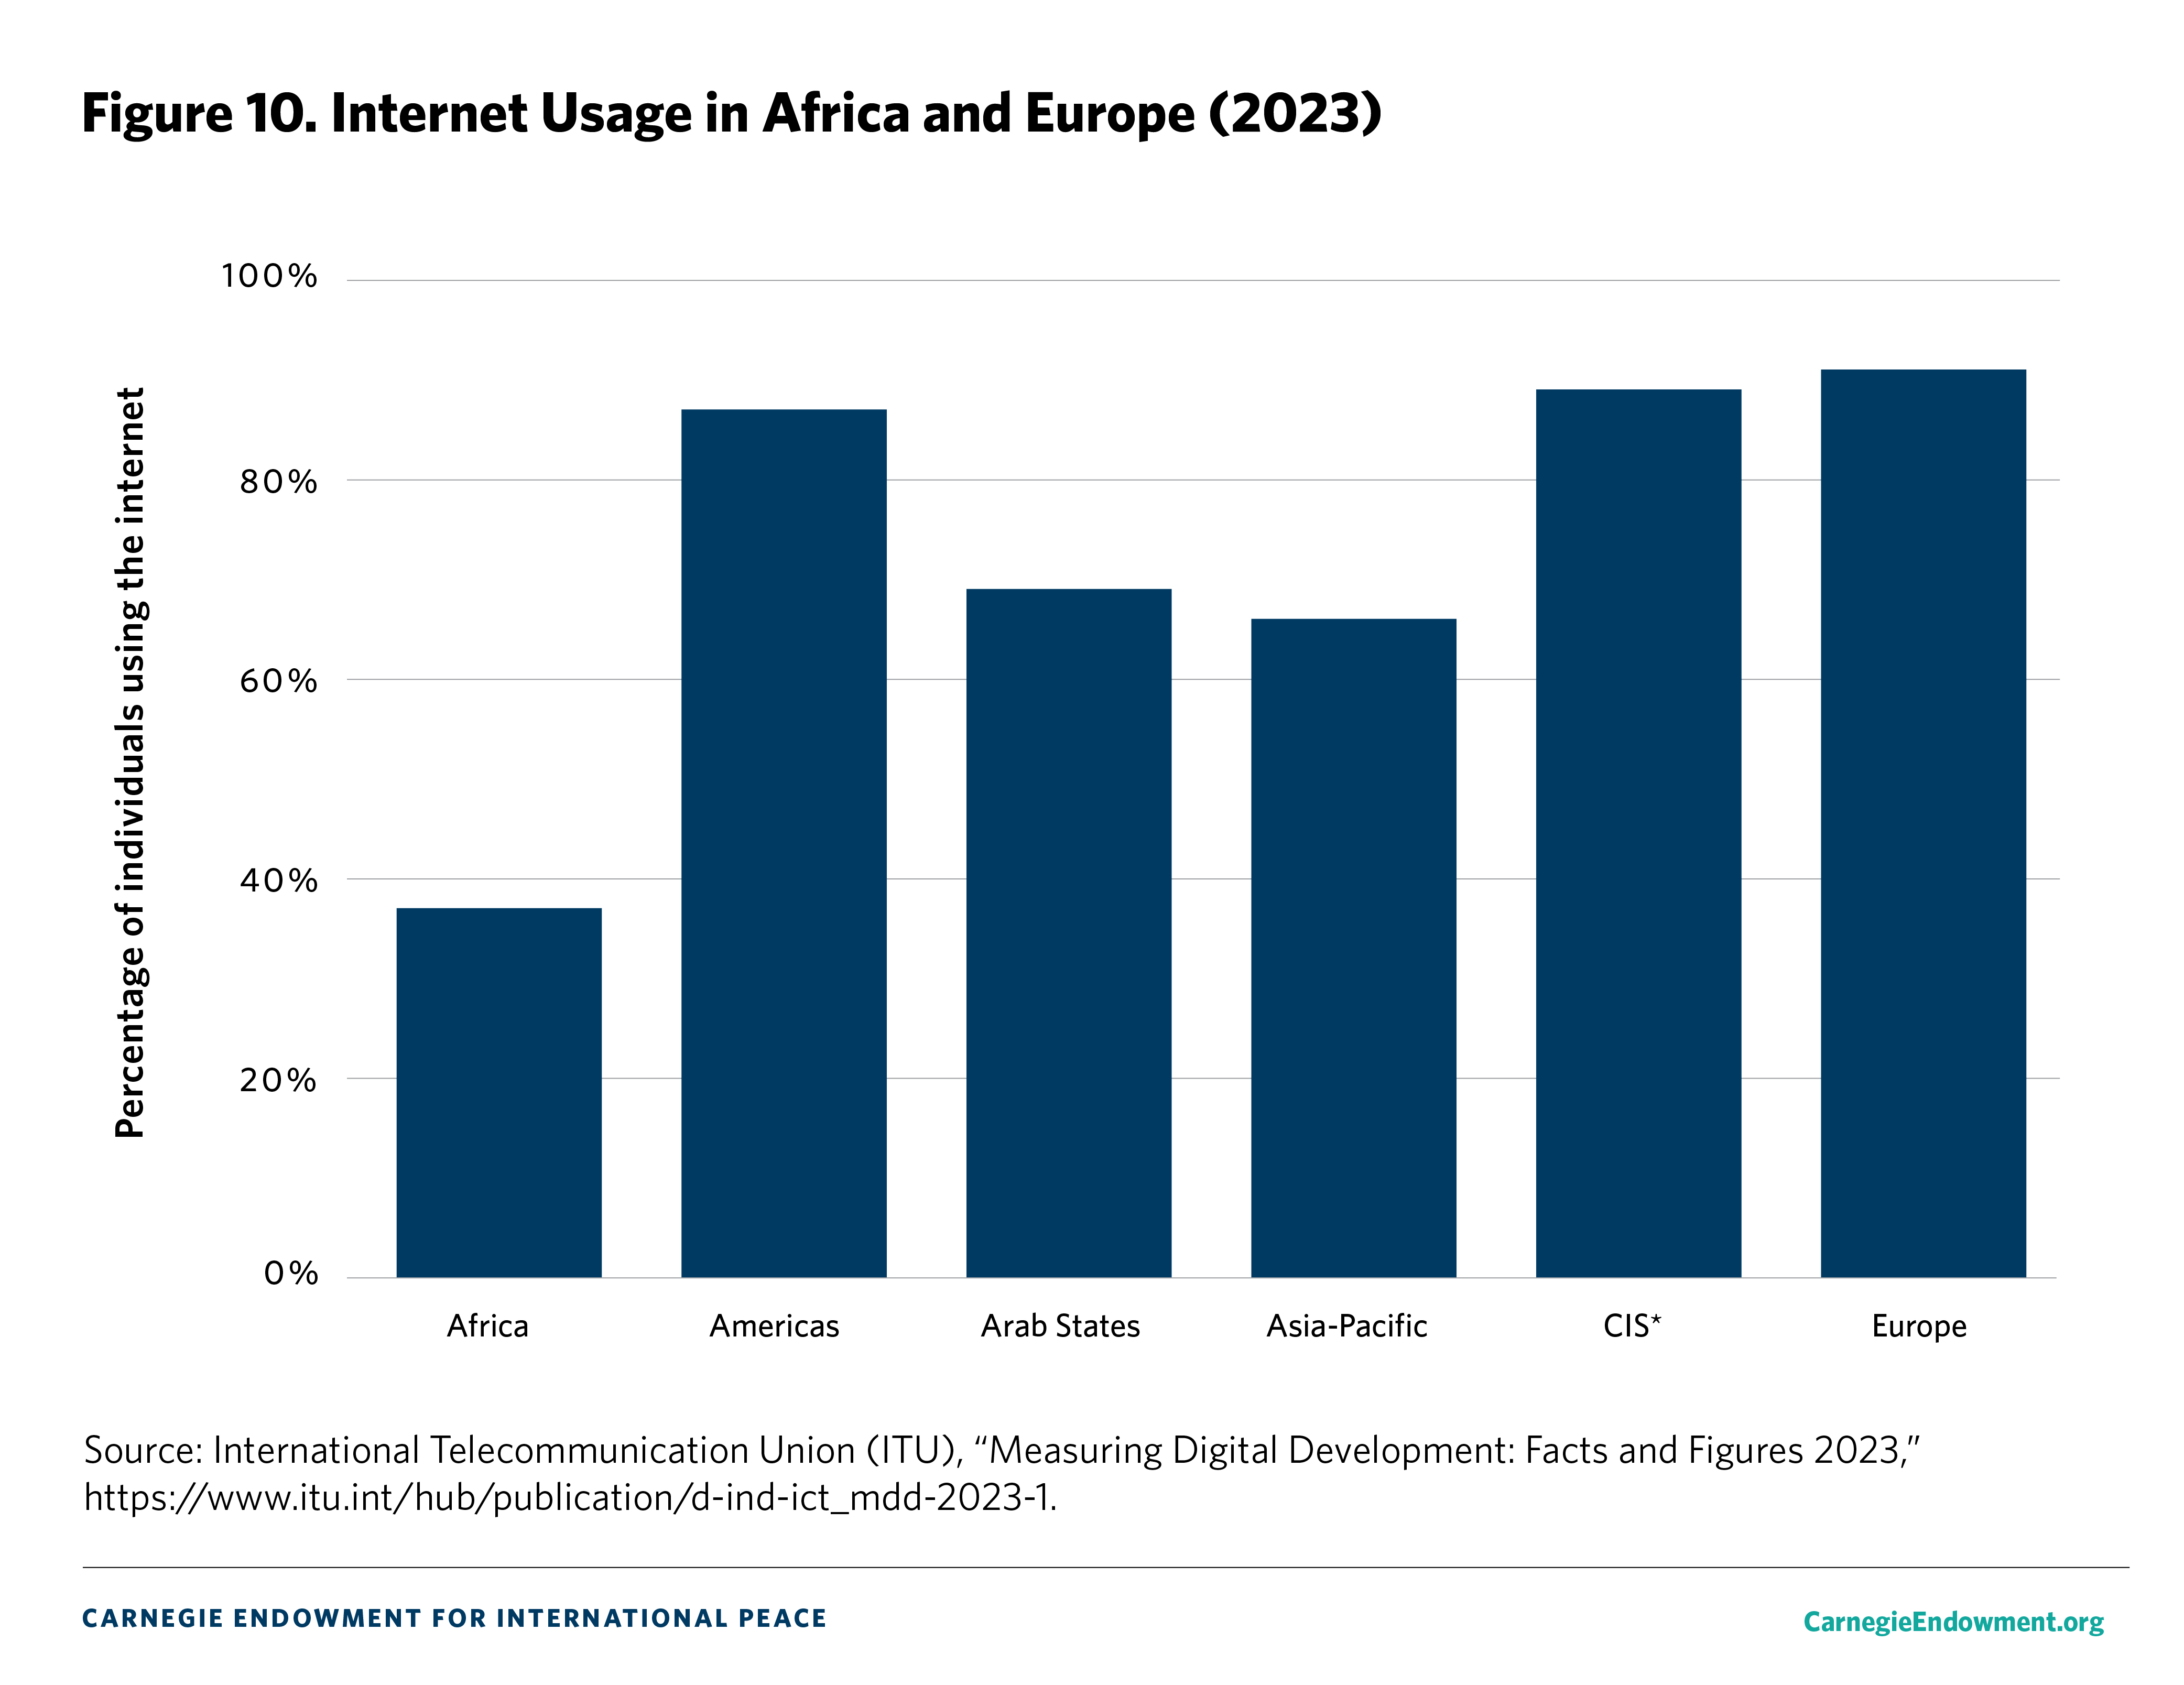 Figure 10: Internet Usage in Africa and Europe (2023)